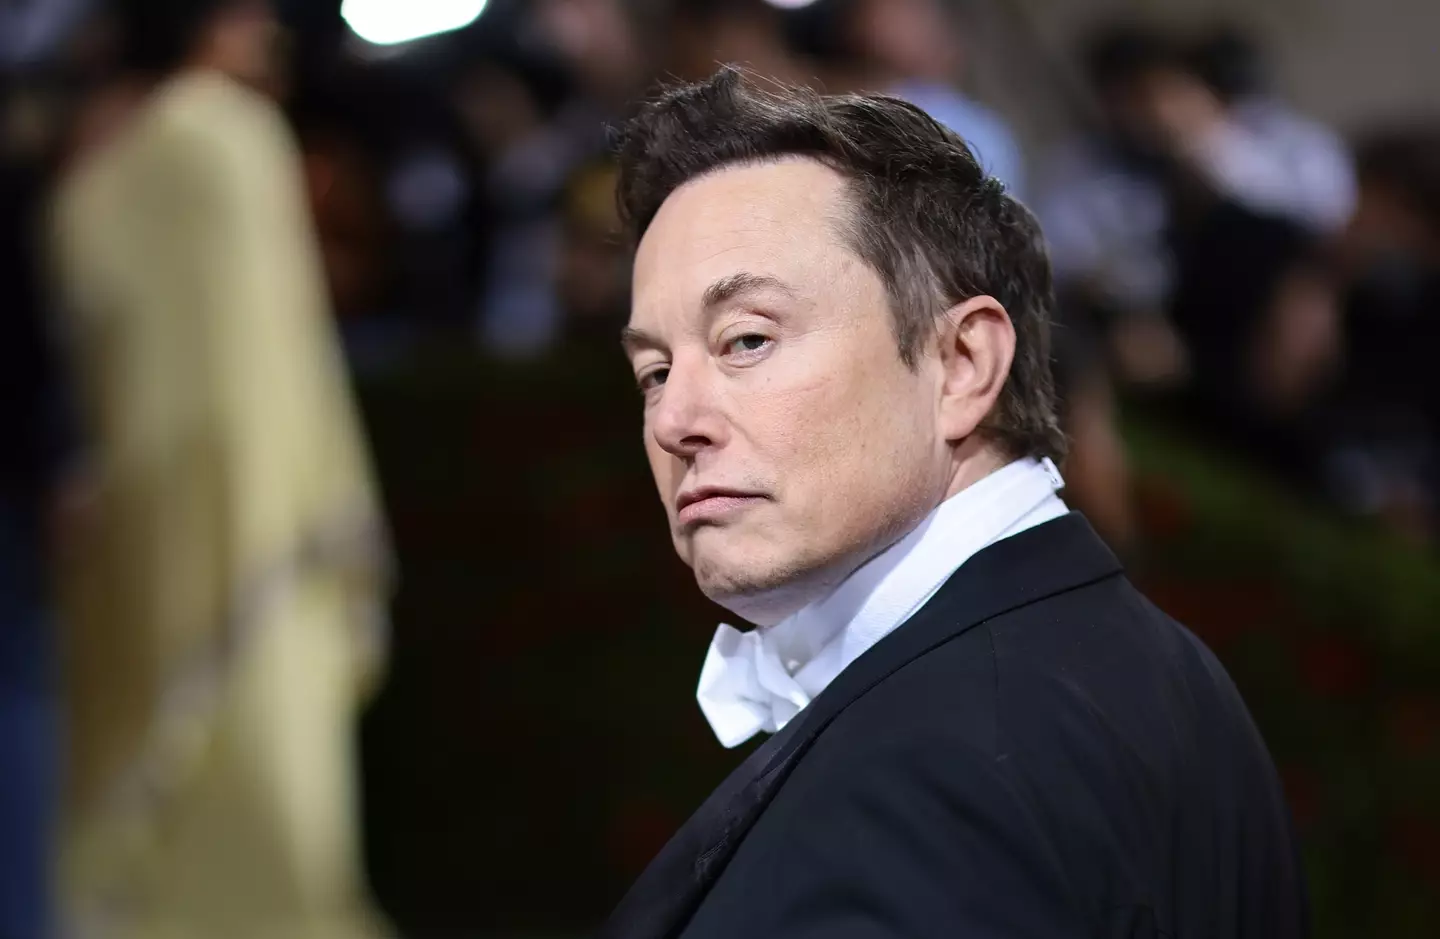 Elon Musk said he feared that the attack would spark an escalation.